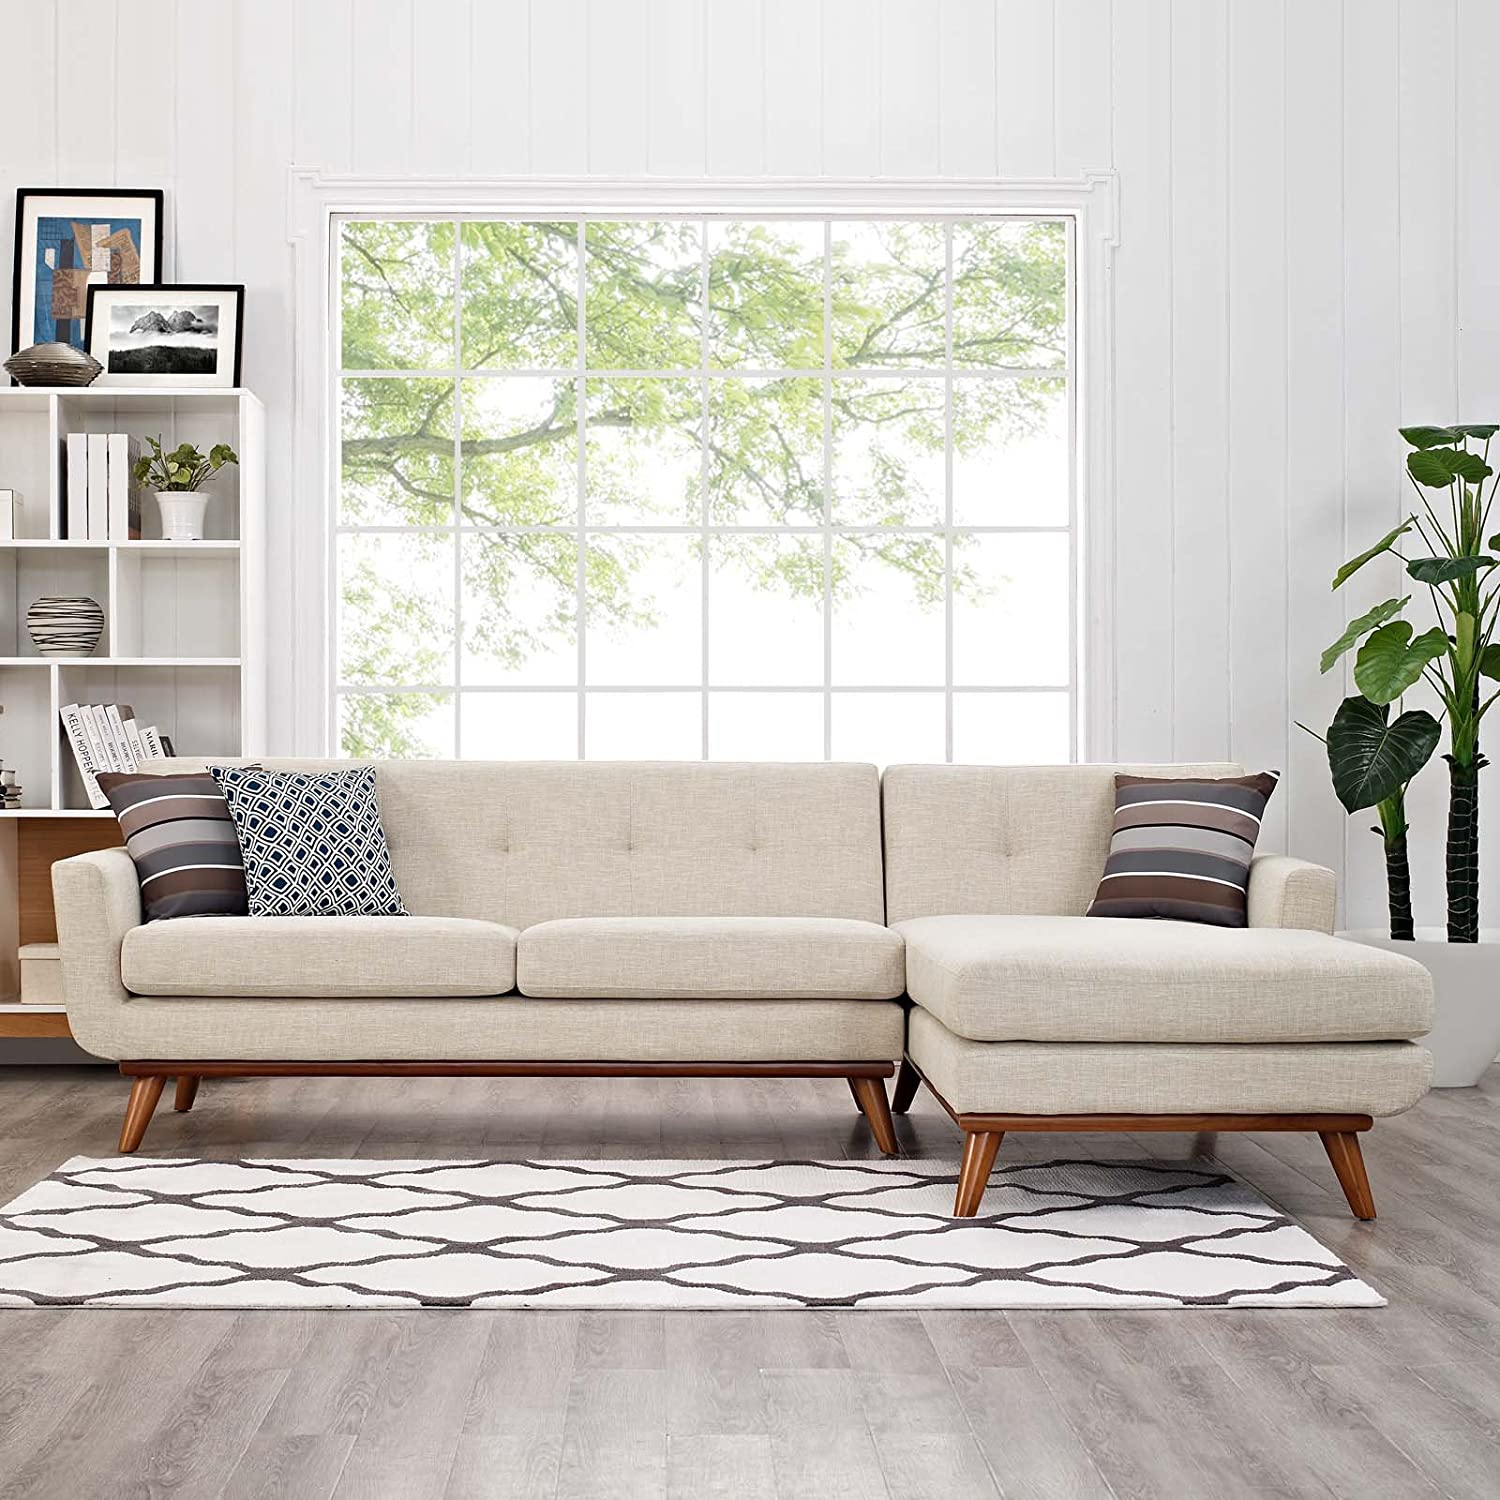 mid-century modern sectional sofa with chaise for sale online stylish